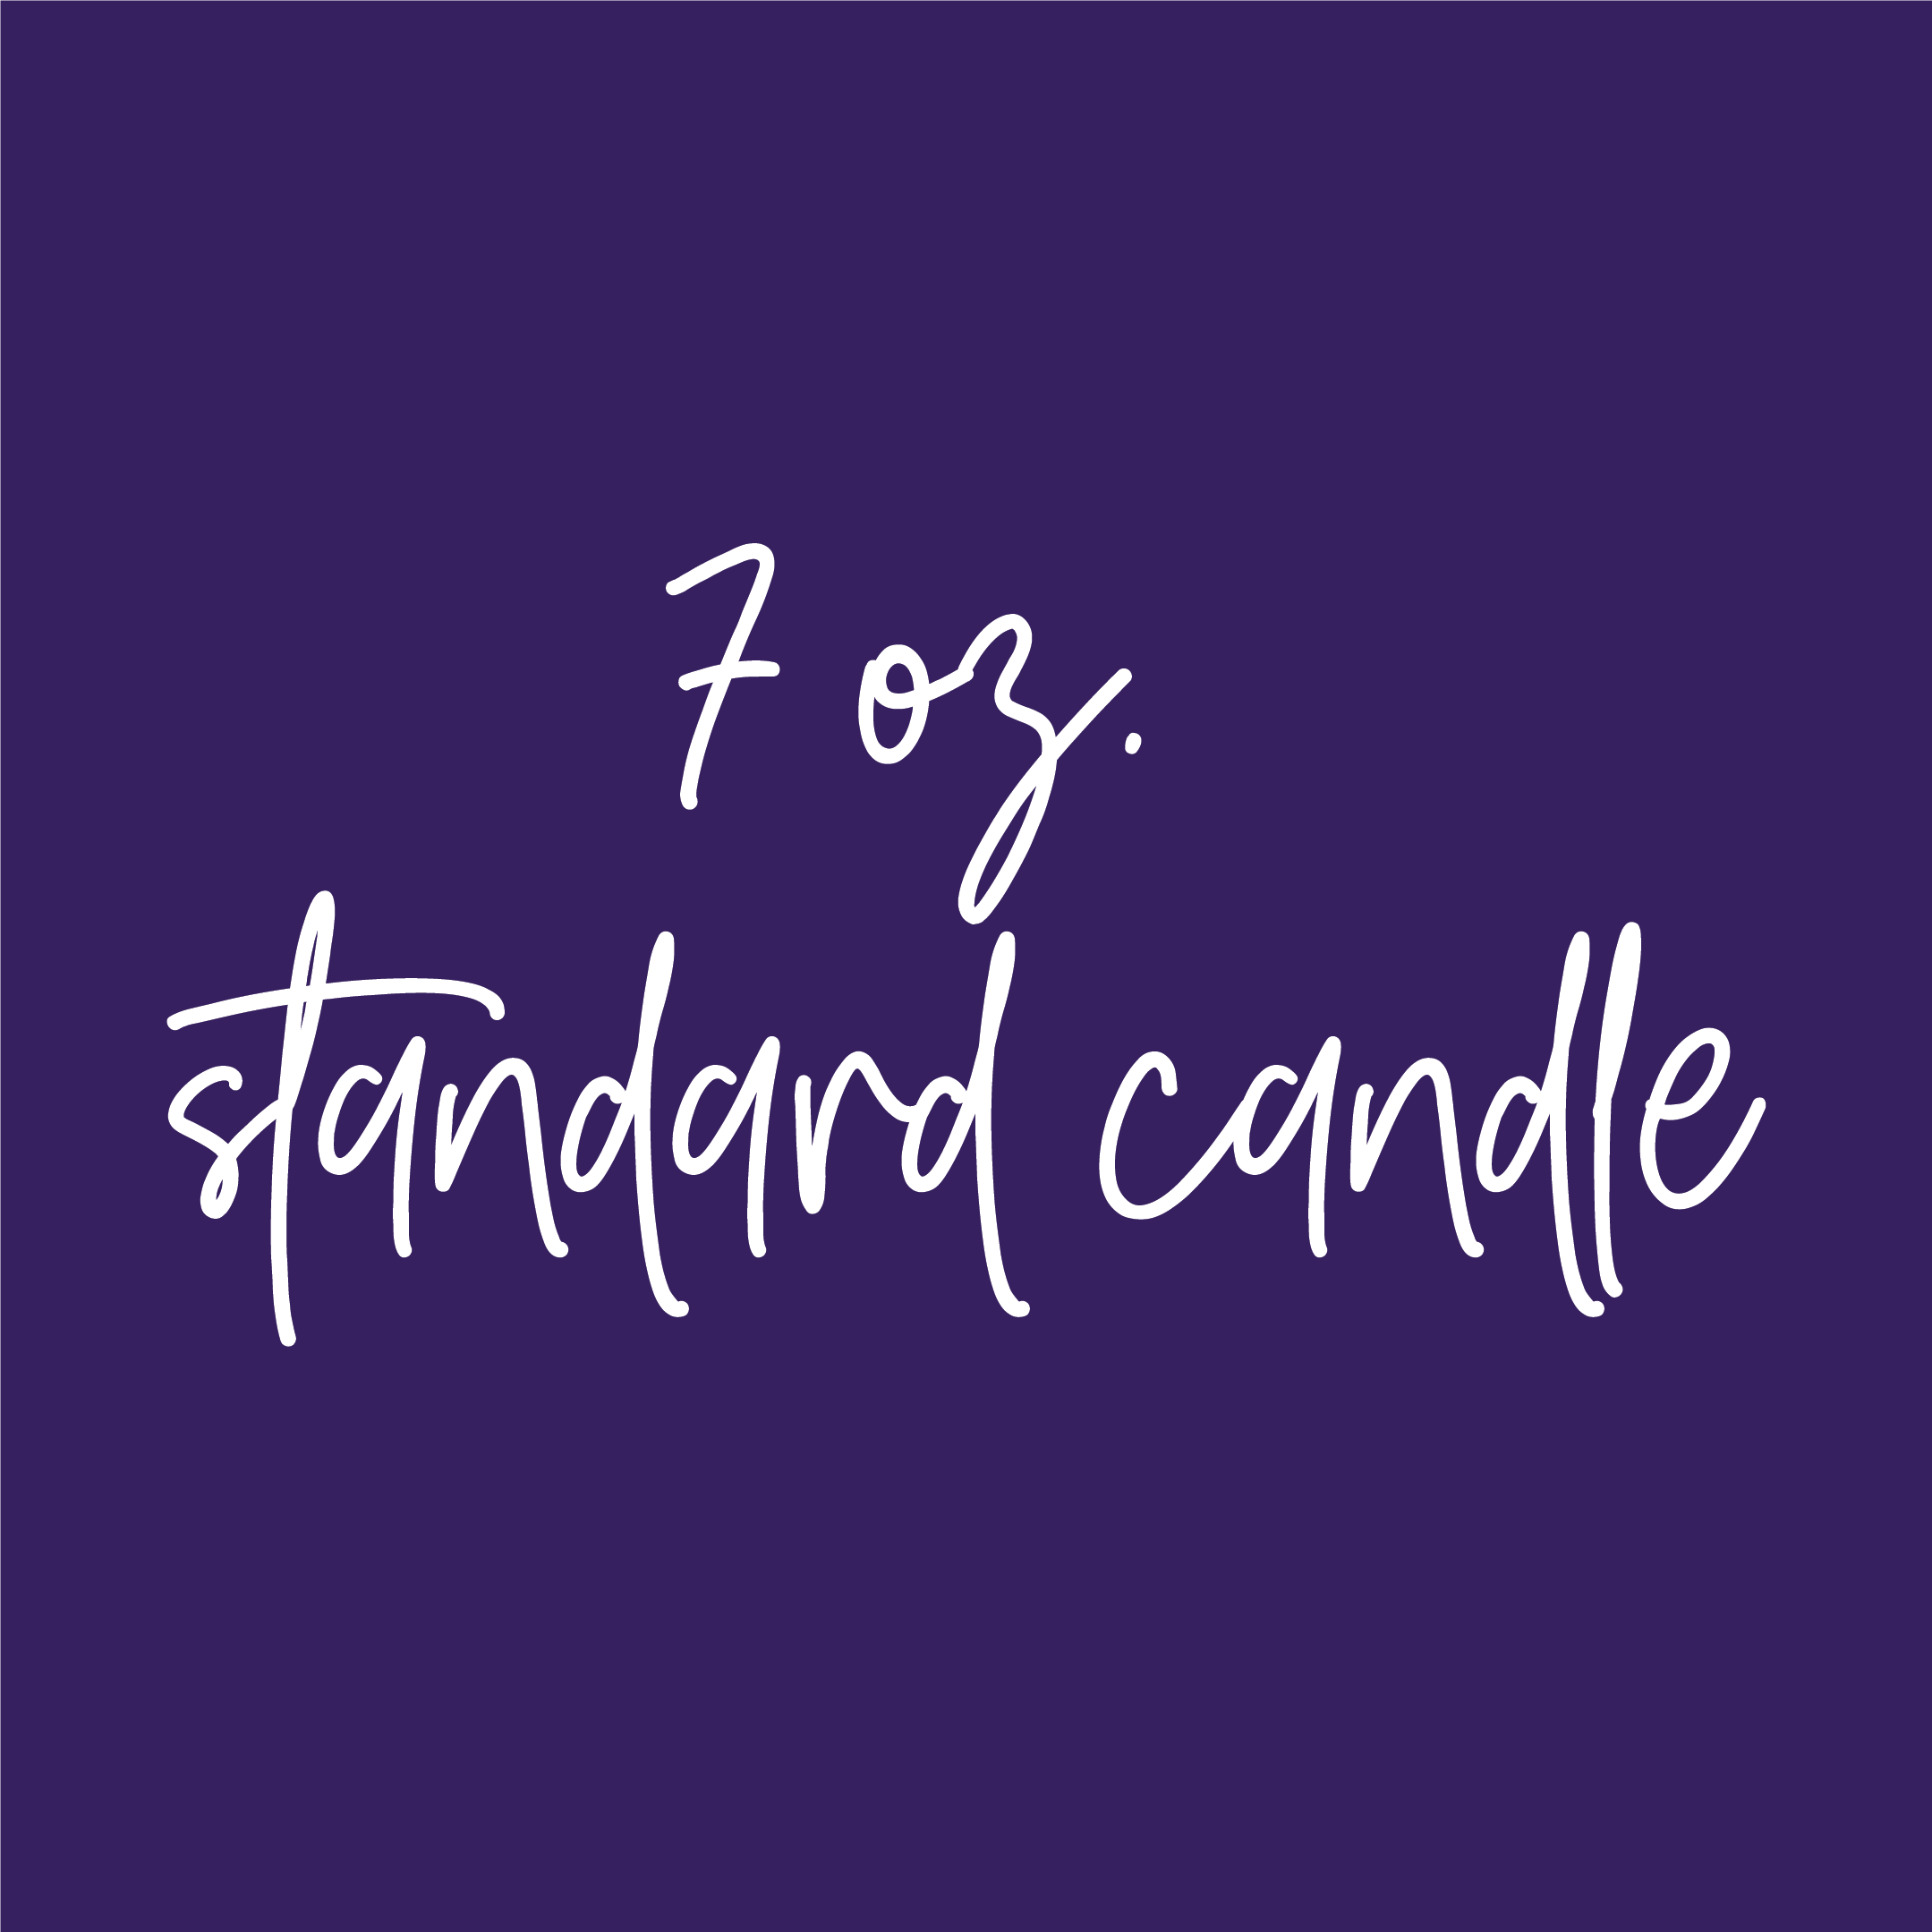 7 oz. Standard Candle Reorder